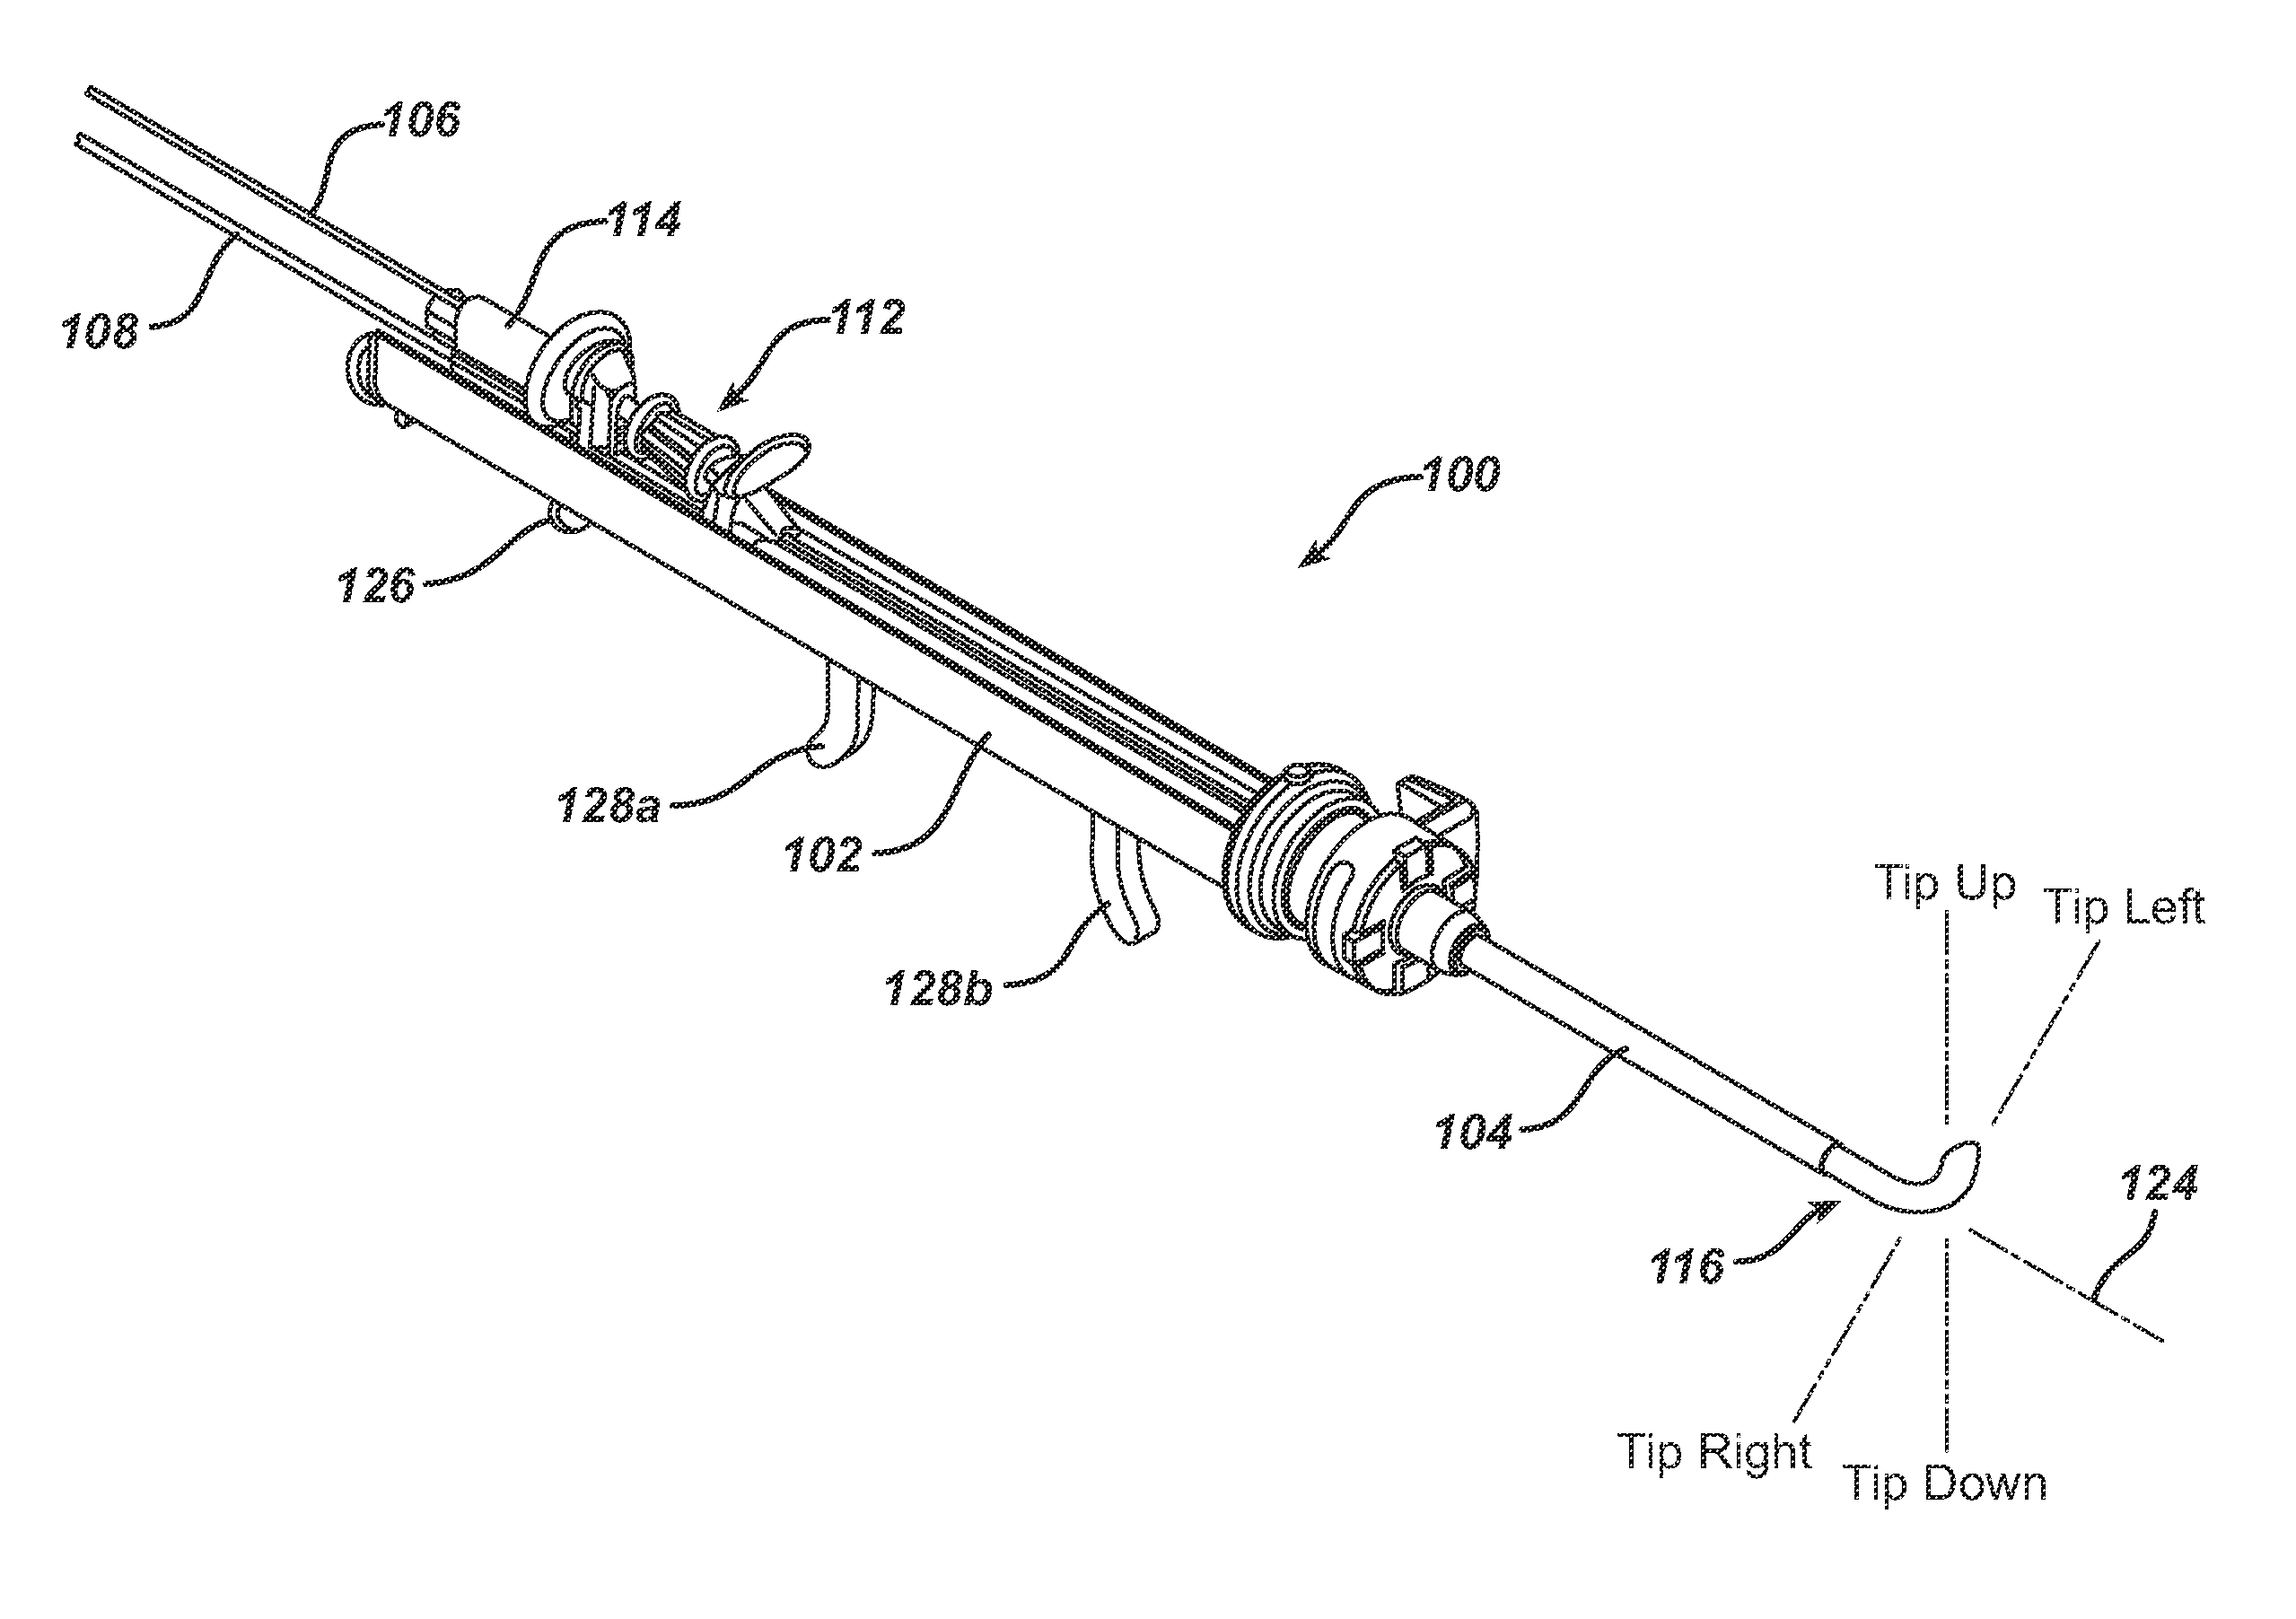 Medical Device and Method for Treatment of a Sinus Opening